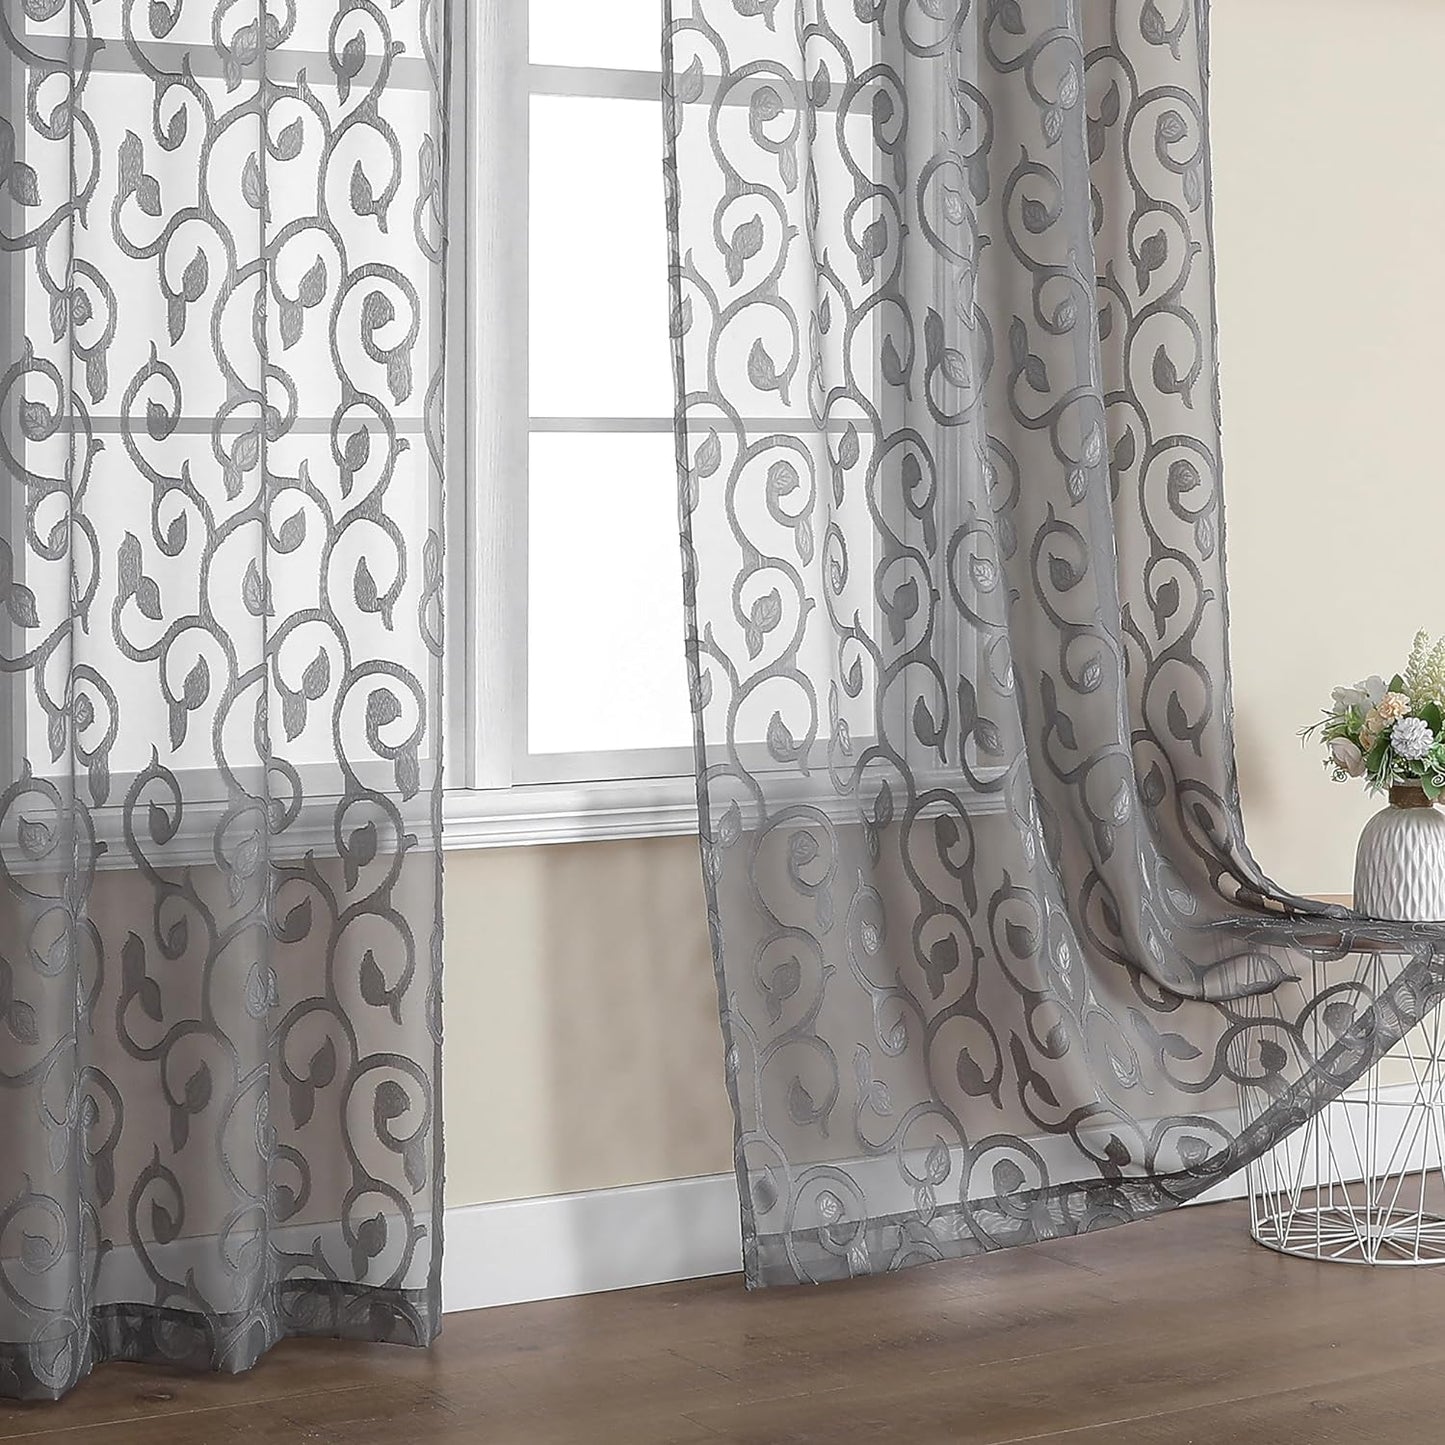 OWENIE Furman Sheer White Curtains 84 Inches Long for Bedroom Living Room 2 Panels Set, White Curtains Jacquard Clip Light Filtering Semi Sheer Curtain Transparent Rod Pocket Window Drapes, 2 Pcs  OWENIE Charcoal Gray 40W X 84L 